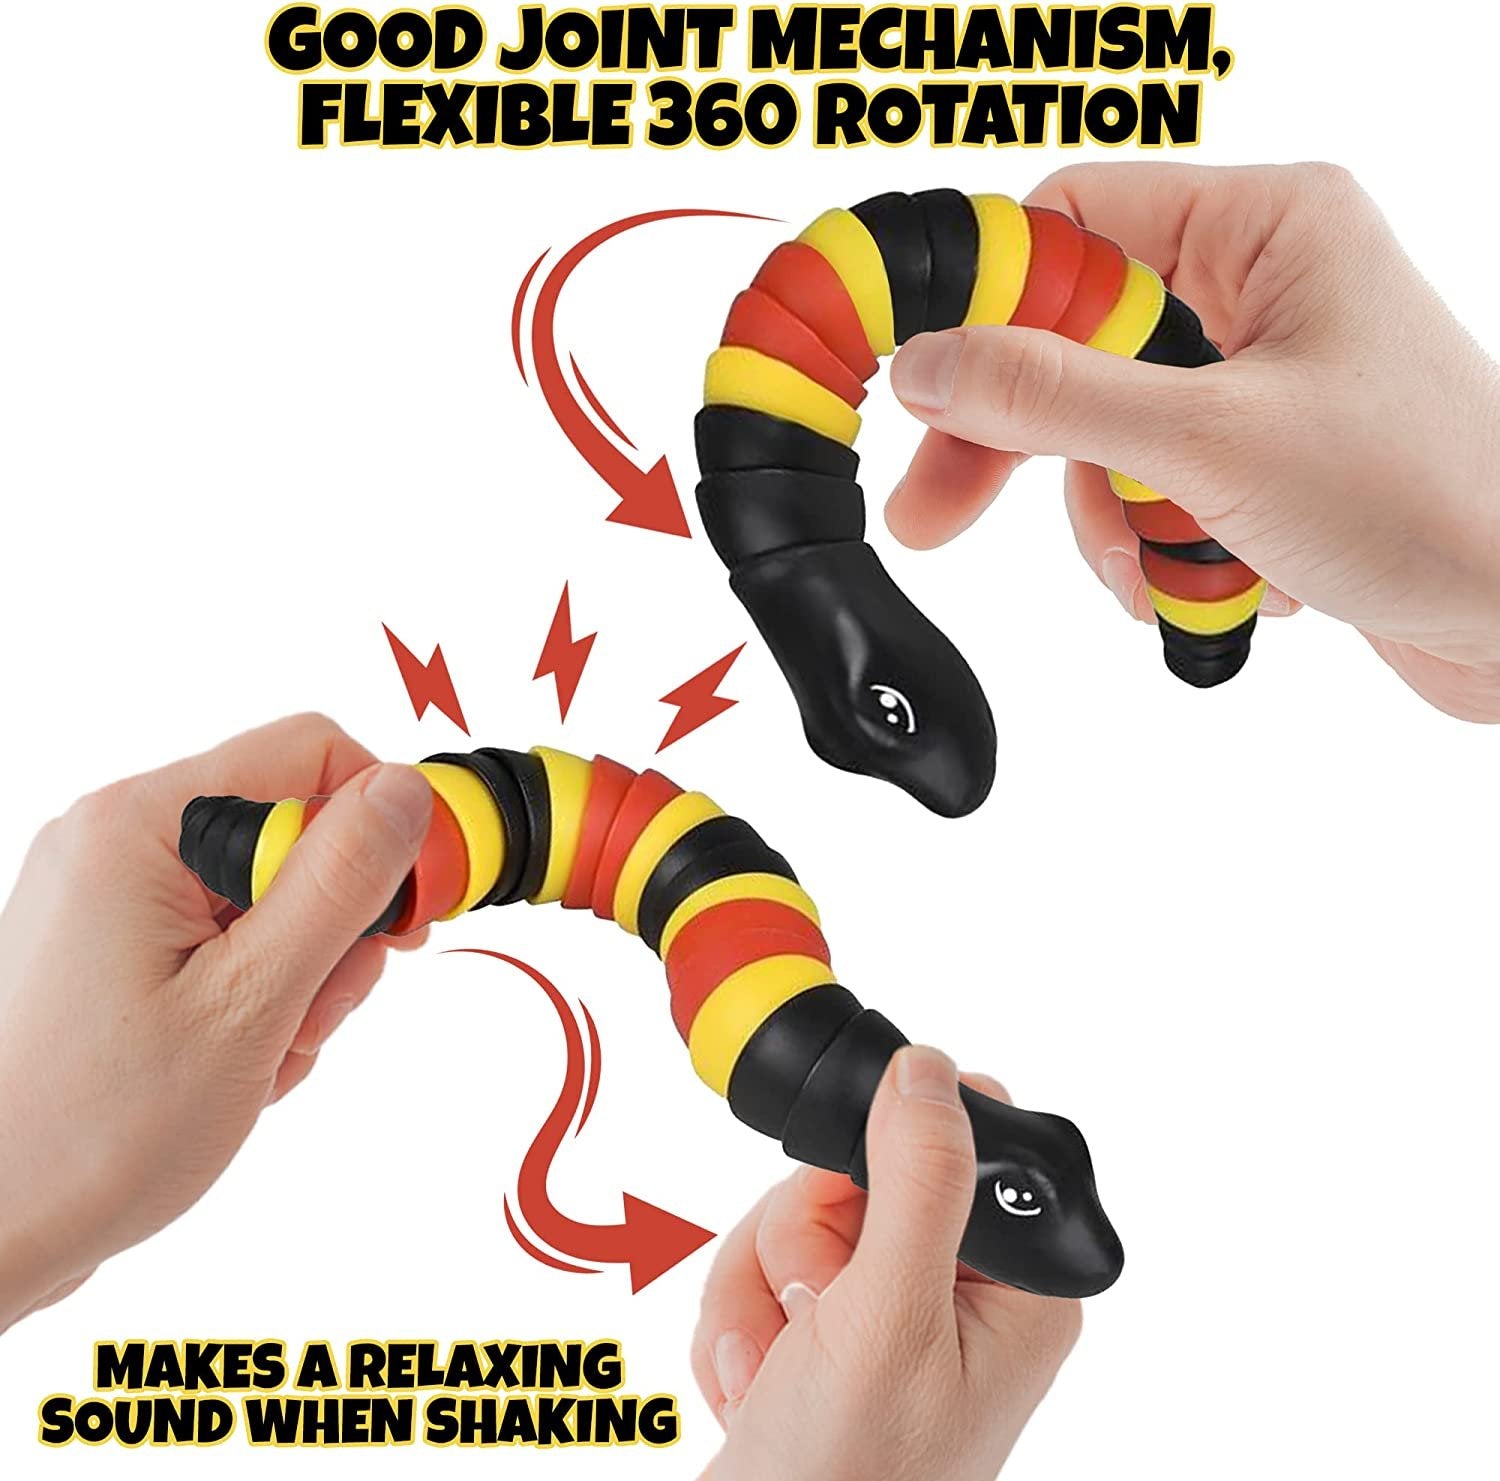 Sensory Fidget Snake Toys for Kids, Set of 4, Plastic Snake Toys with Wiggle Movement and Clacking Sounds, Stress Relief Fidget Toys for Kids, Goodie Bag Stuffers and Stocking Fillers